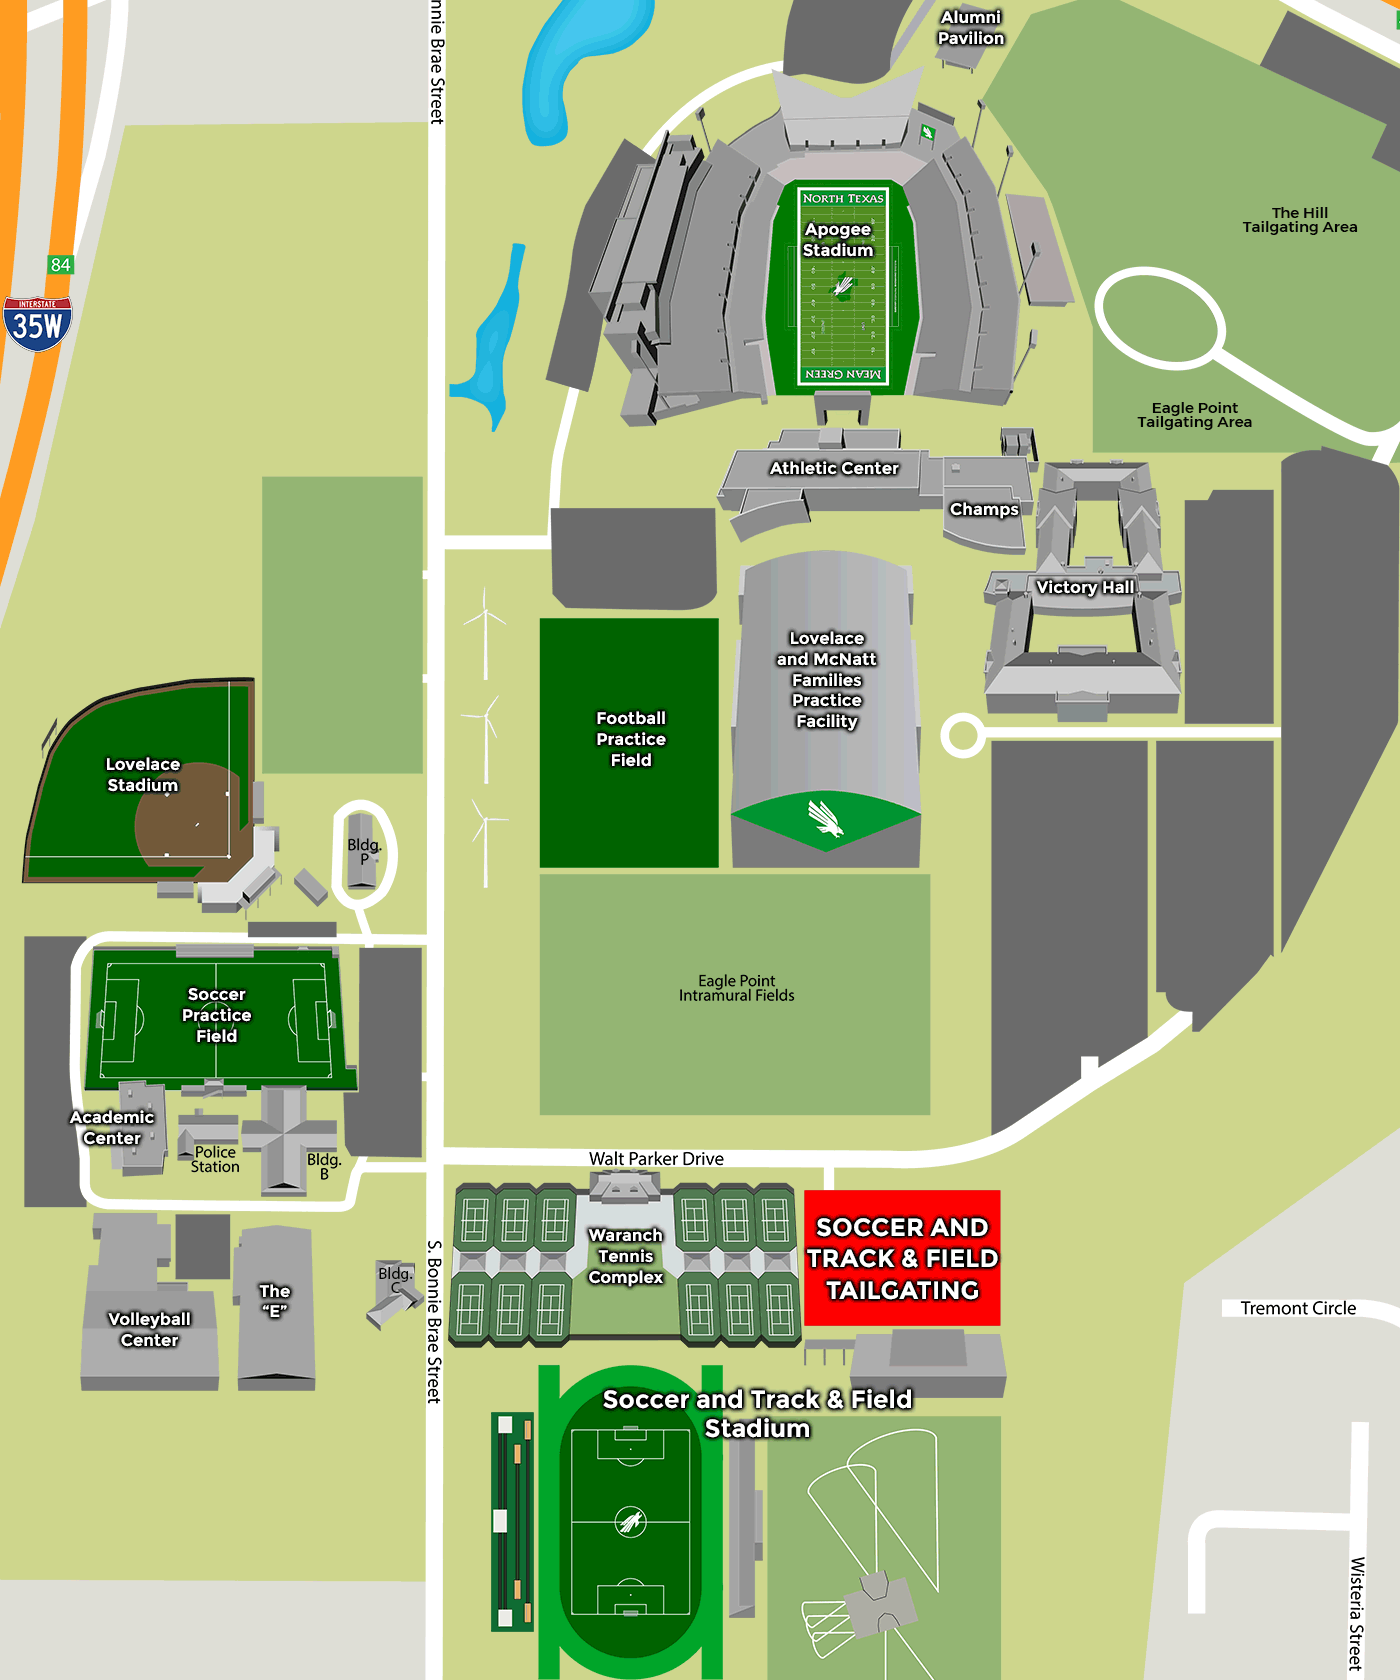 Soccer and Track & Field Stadium tailgating map